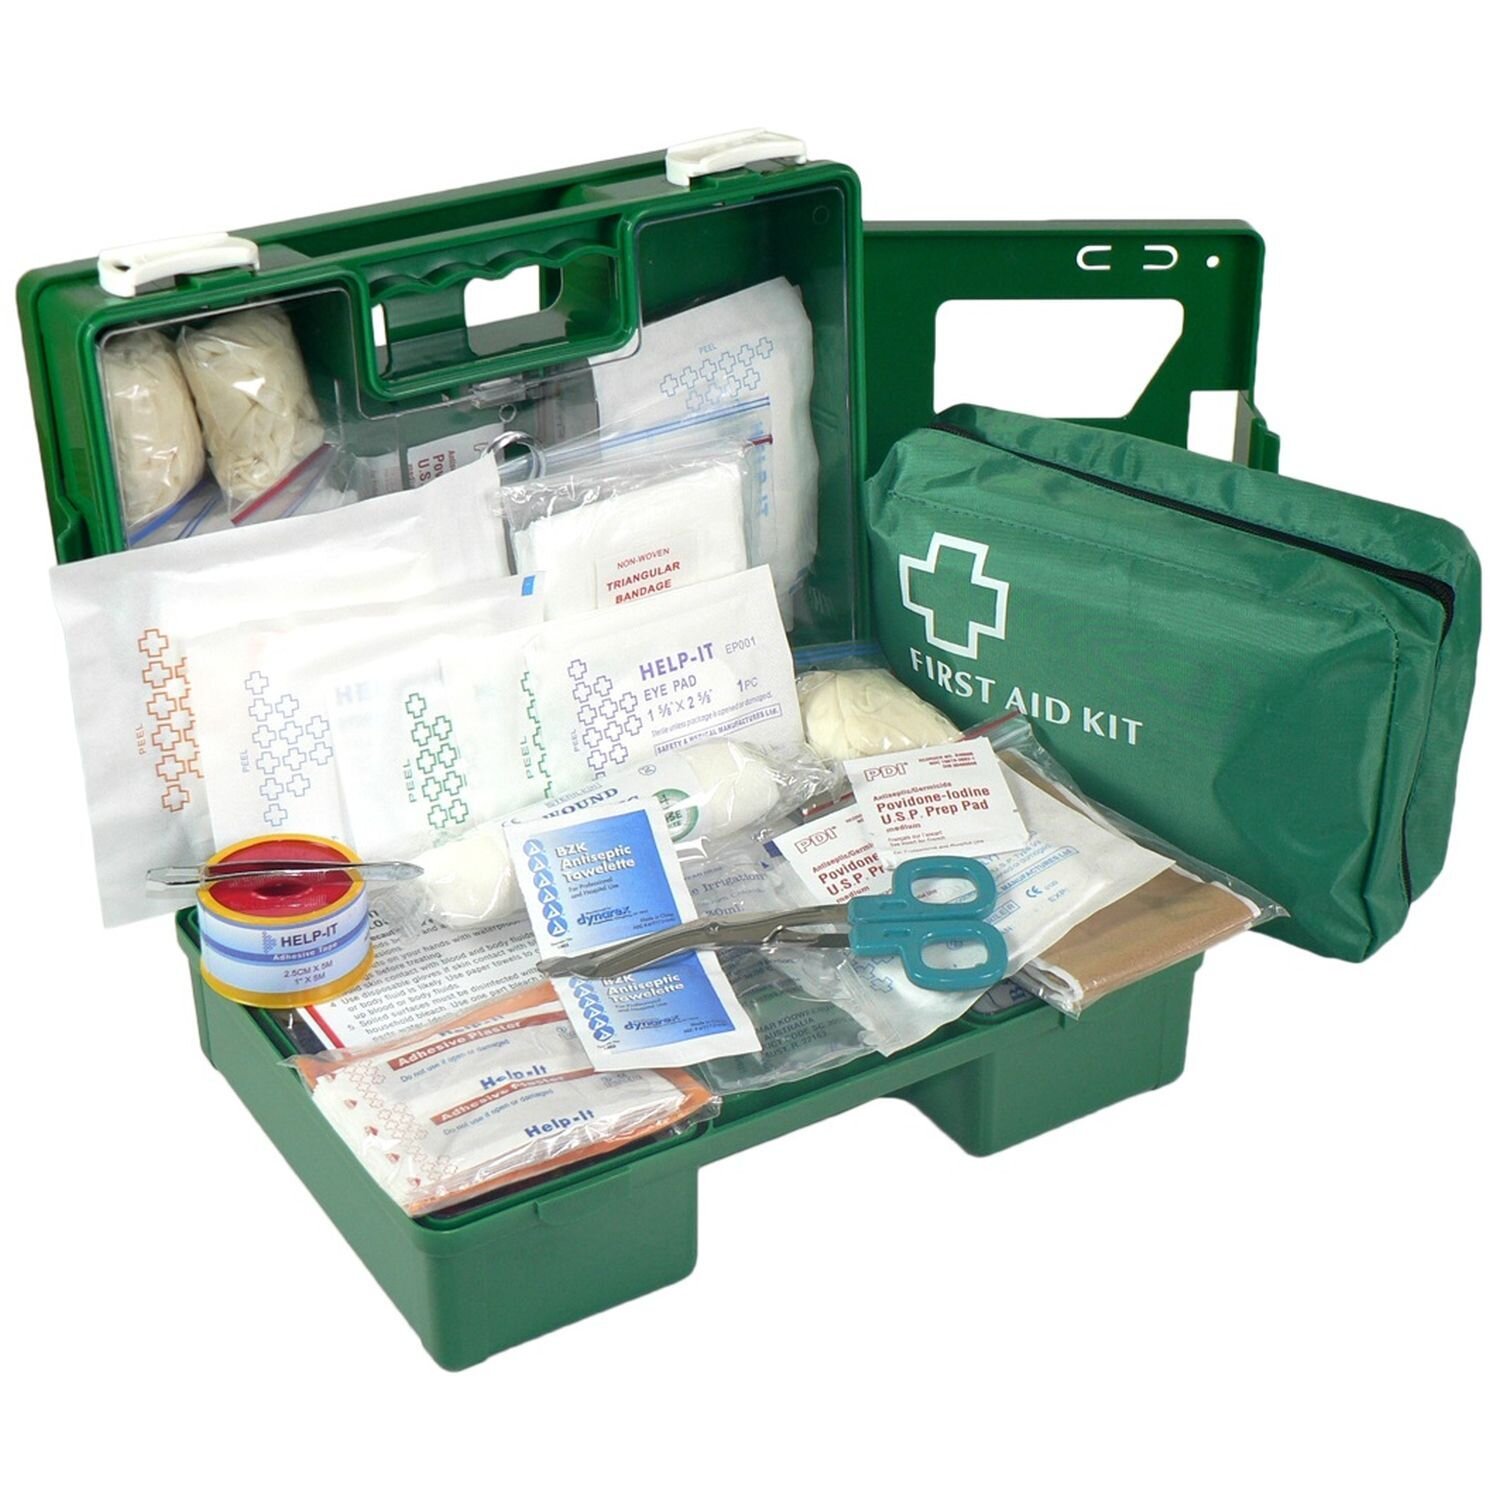 1-12 Industrial Wall Mount First Aid Kit